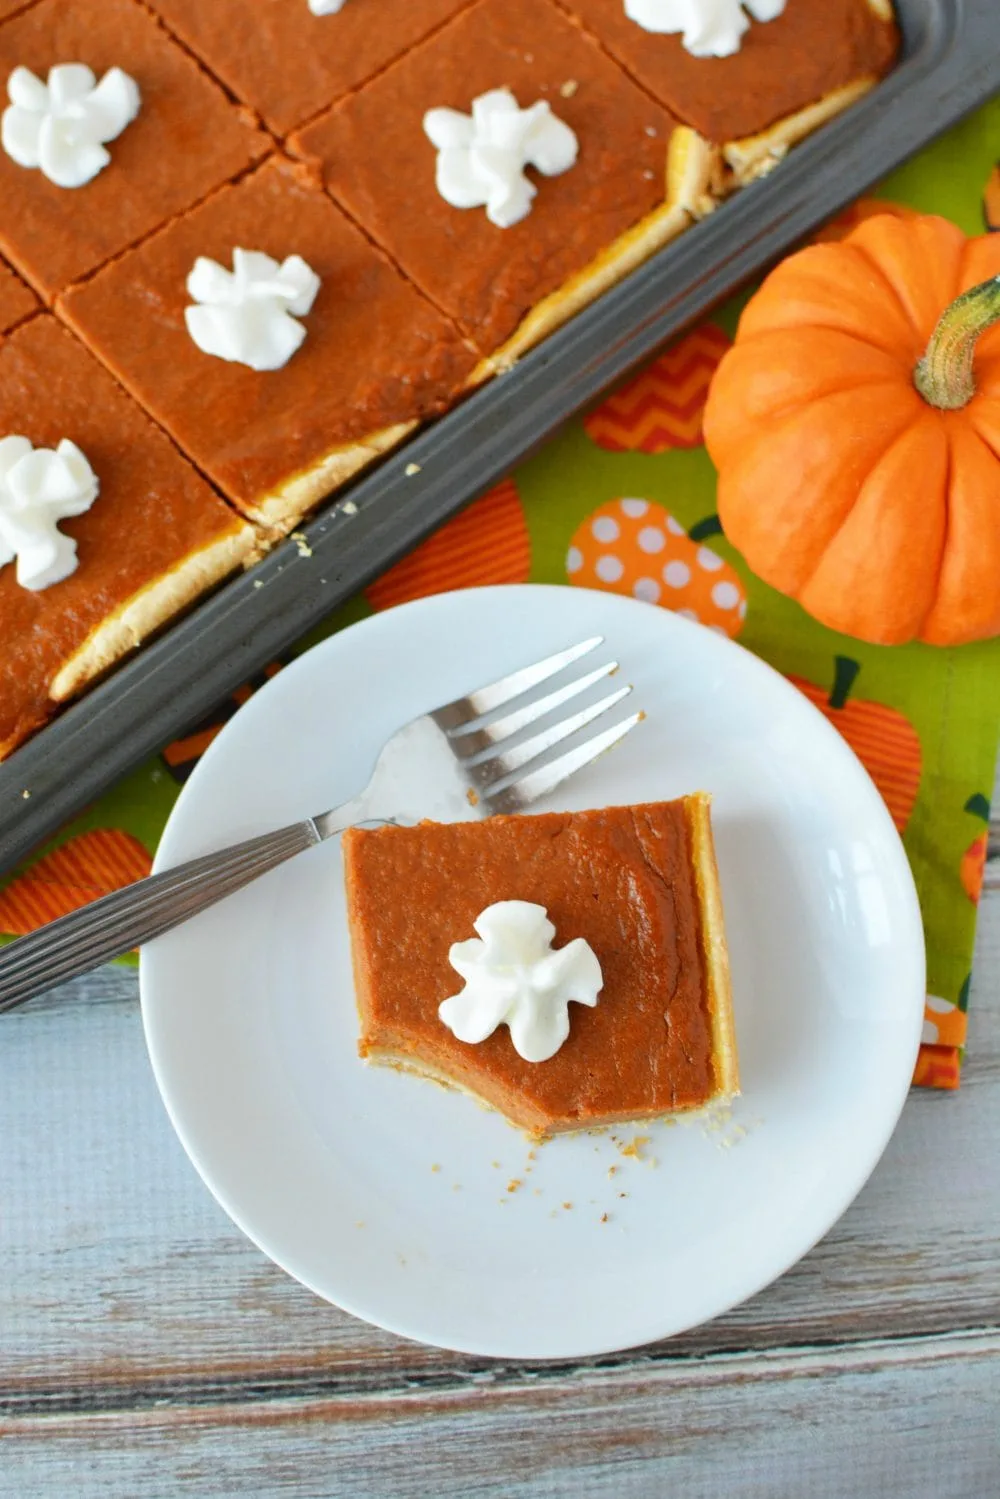 Slice of pumpkin pie on a plate with a bite taken out.